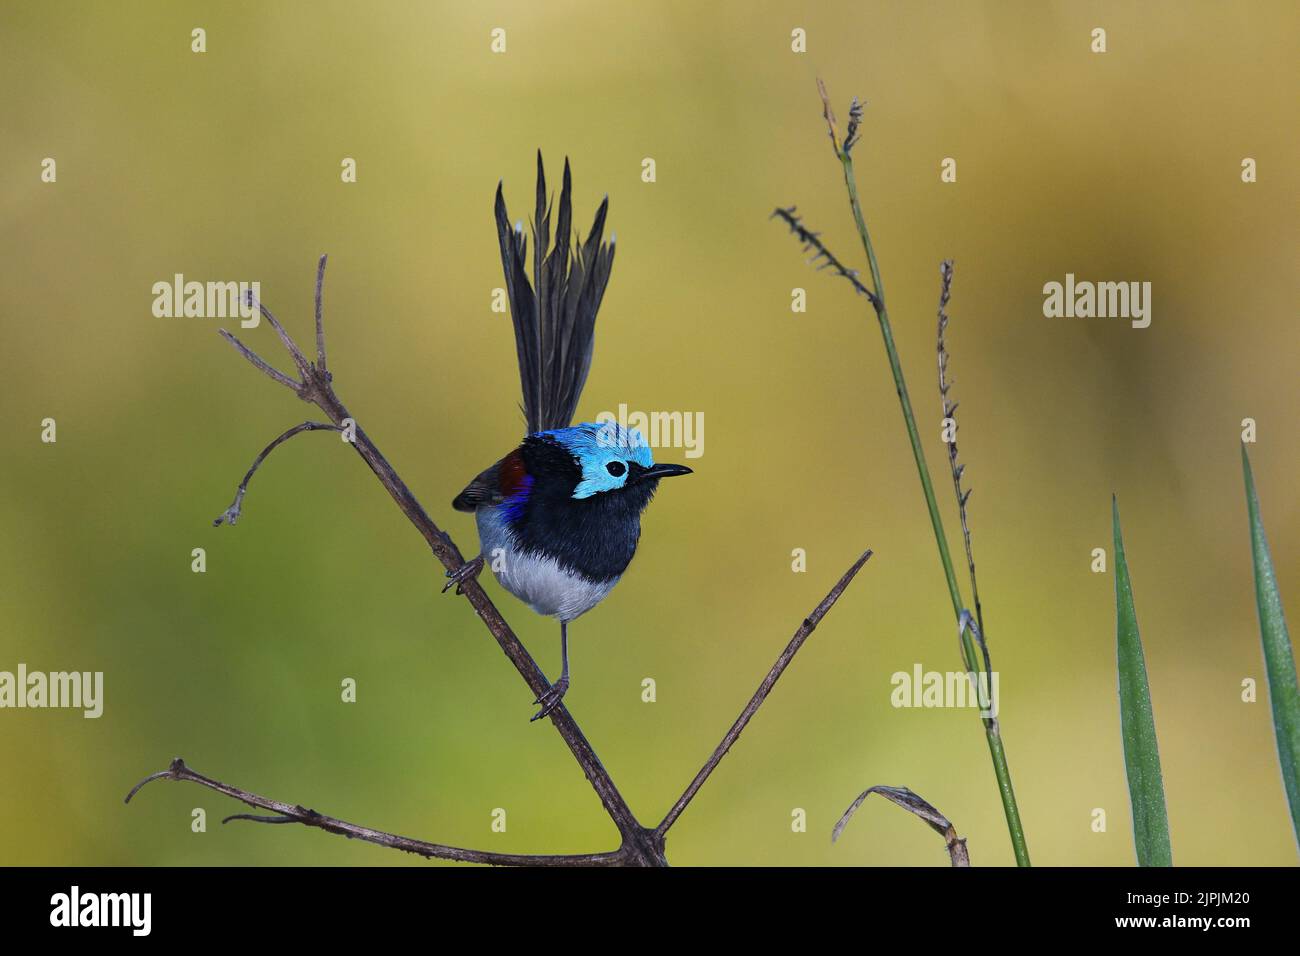 An Australian male Variegated Fairy-wren -Malurus lamberti, Nominate race- bird perched on a stem of tall grass surveying his territory Stock Photo